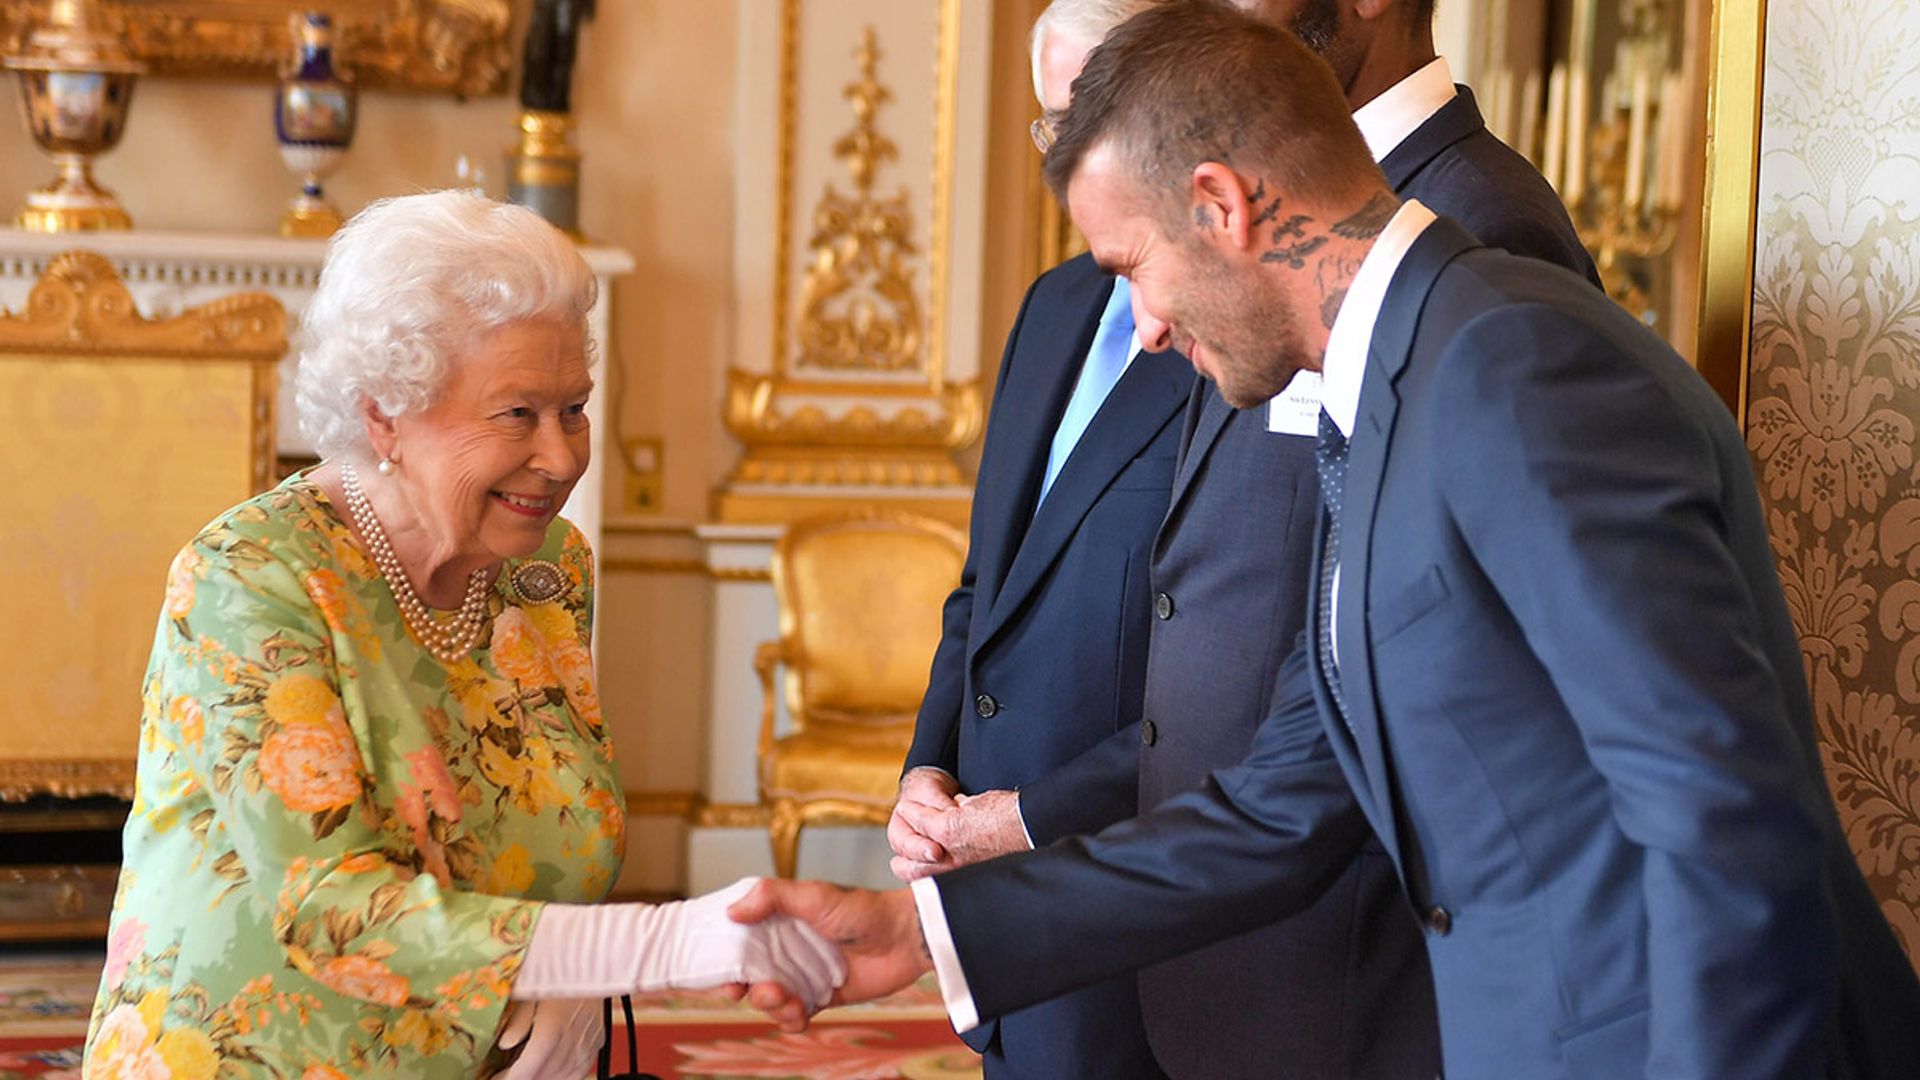 The Queen's Platinum Party at the Palace: epic line-up revealed including Elton John and David Beckham